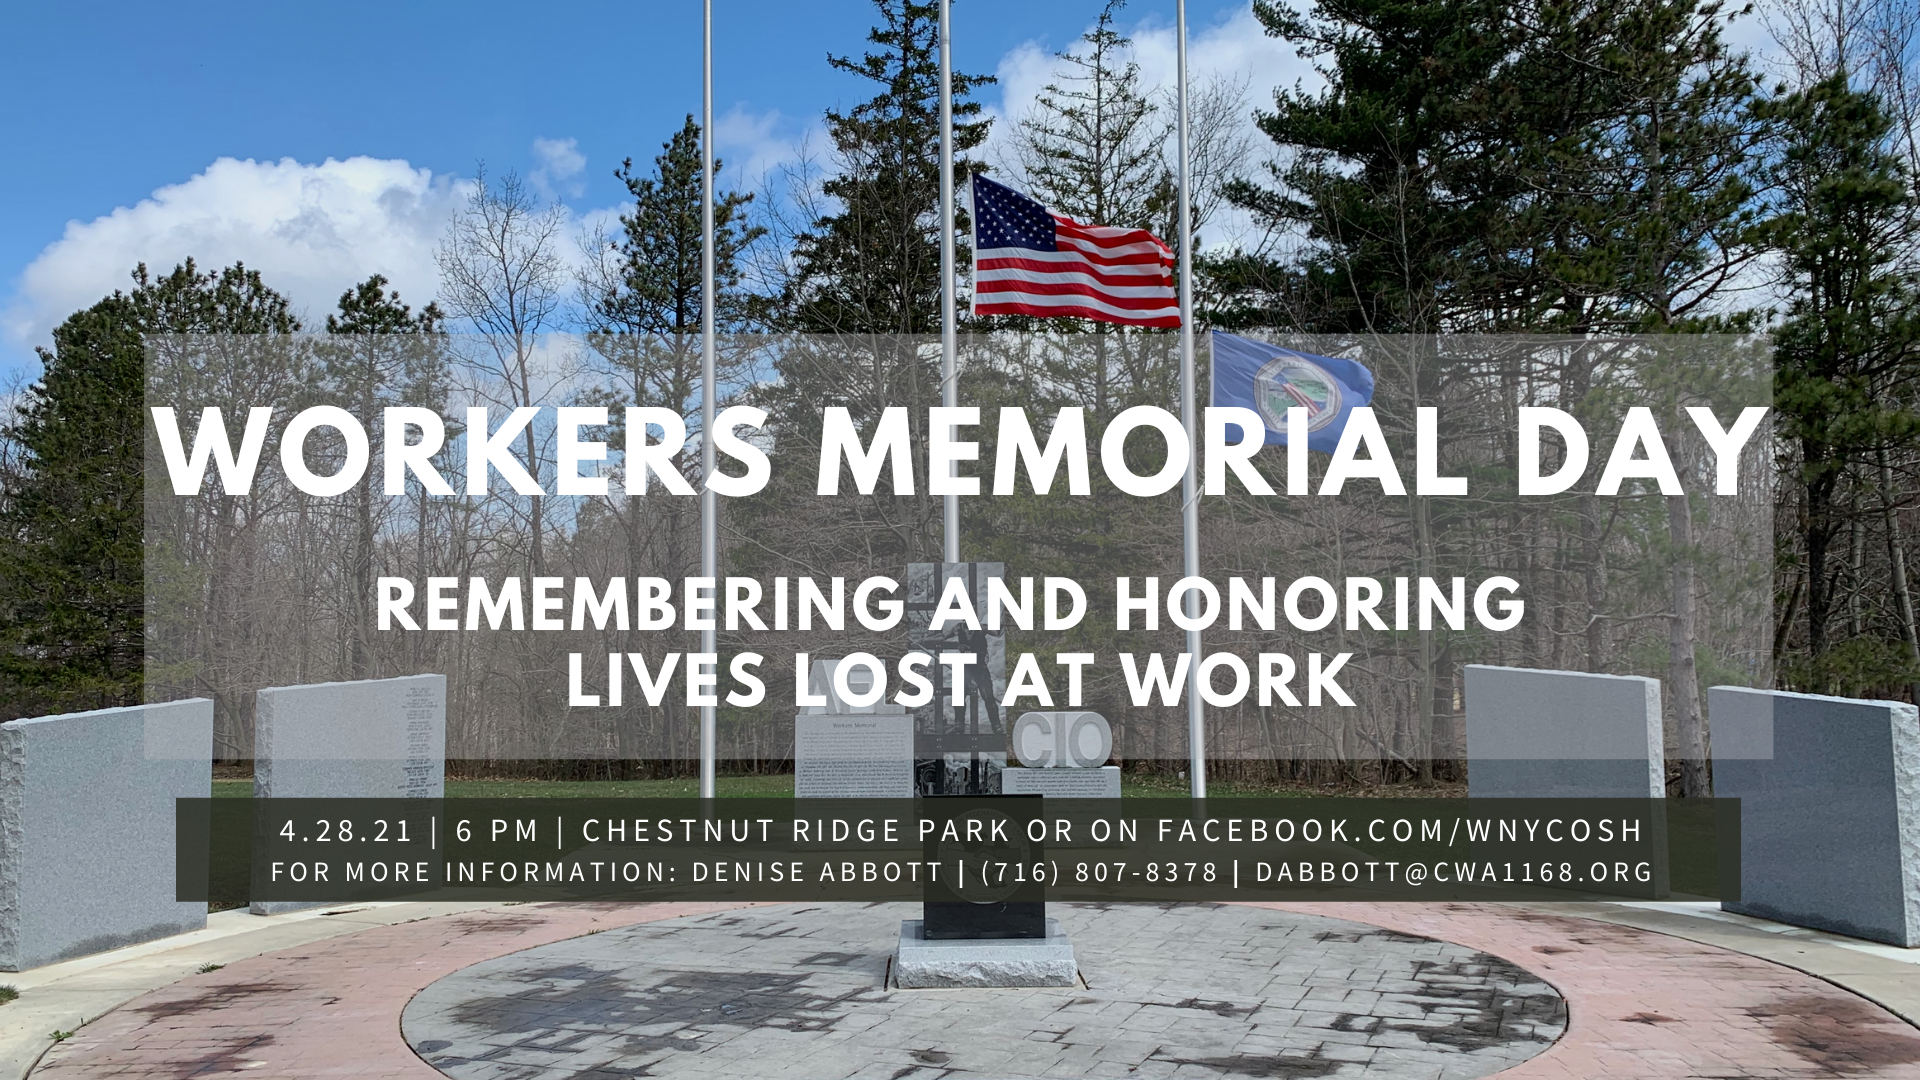 Workers Memorial Day 2021, taking place on April 28 at 6pm in Chestnut Ridge Park or on Facebook.